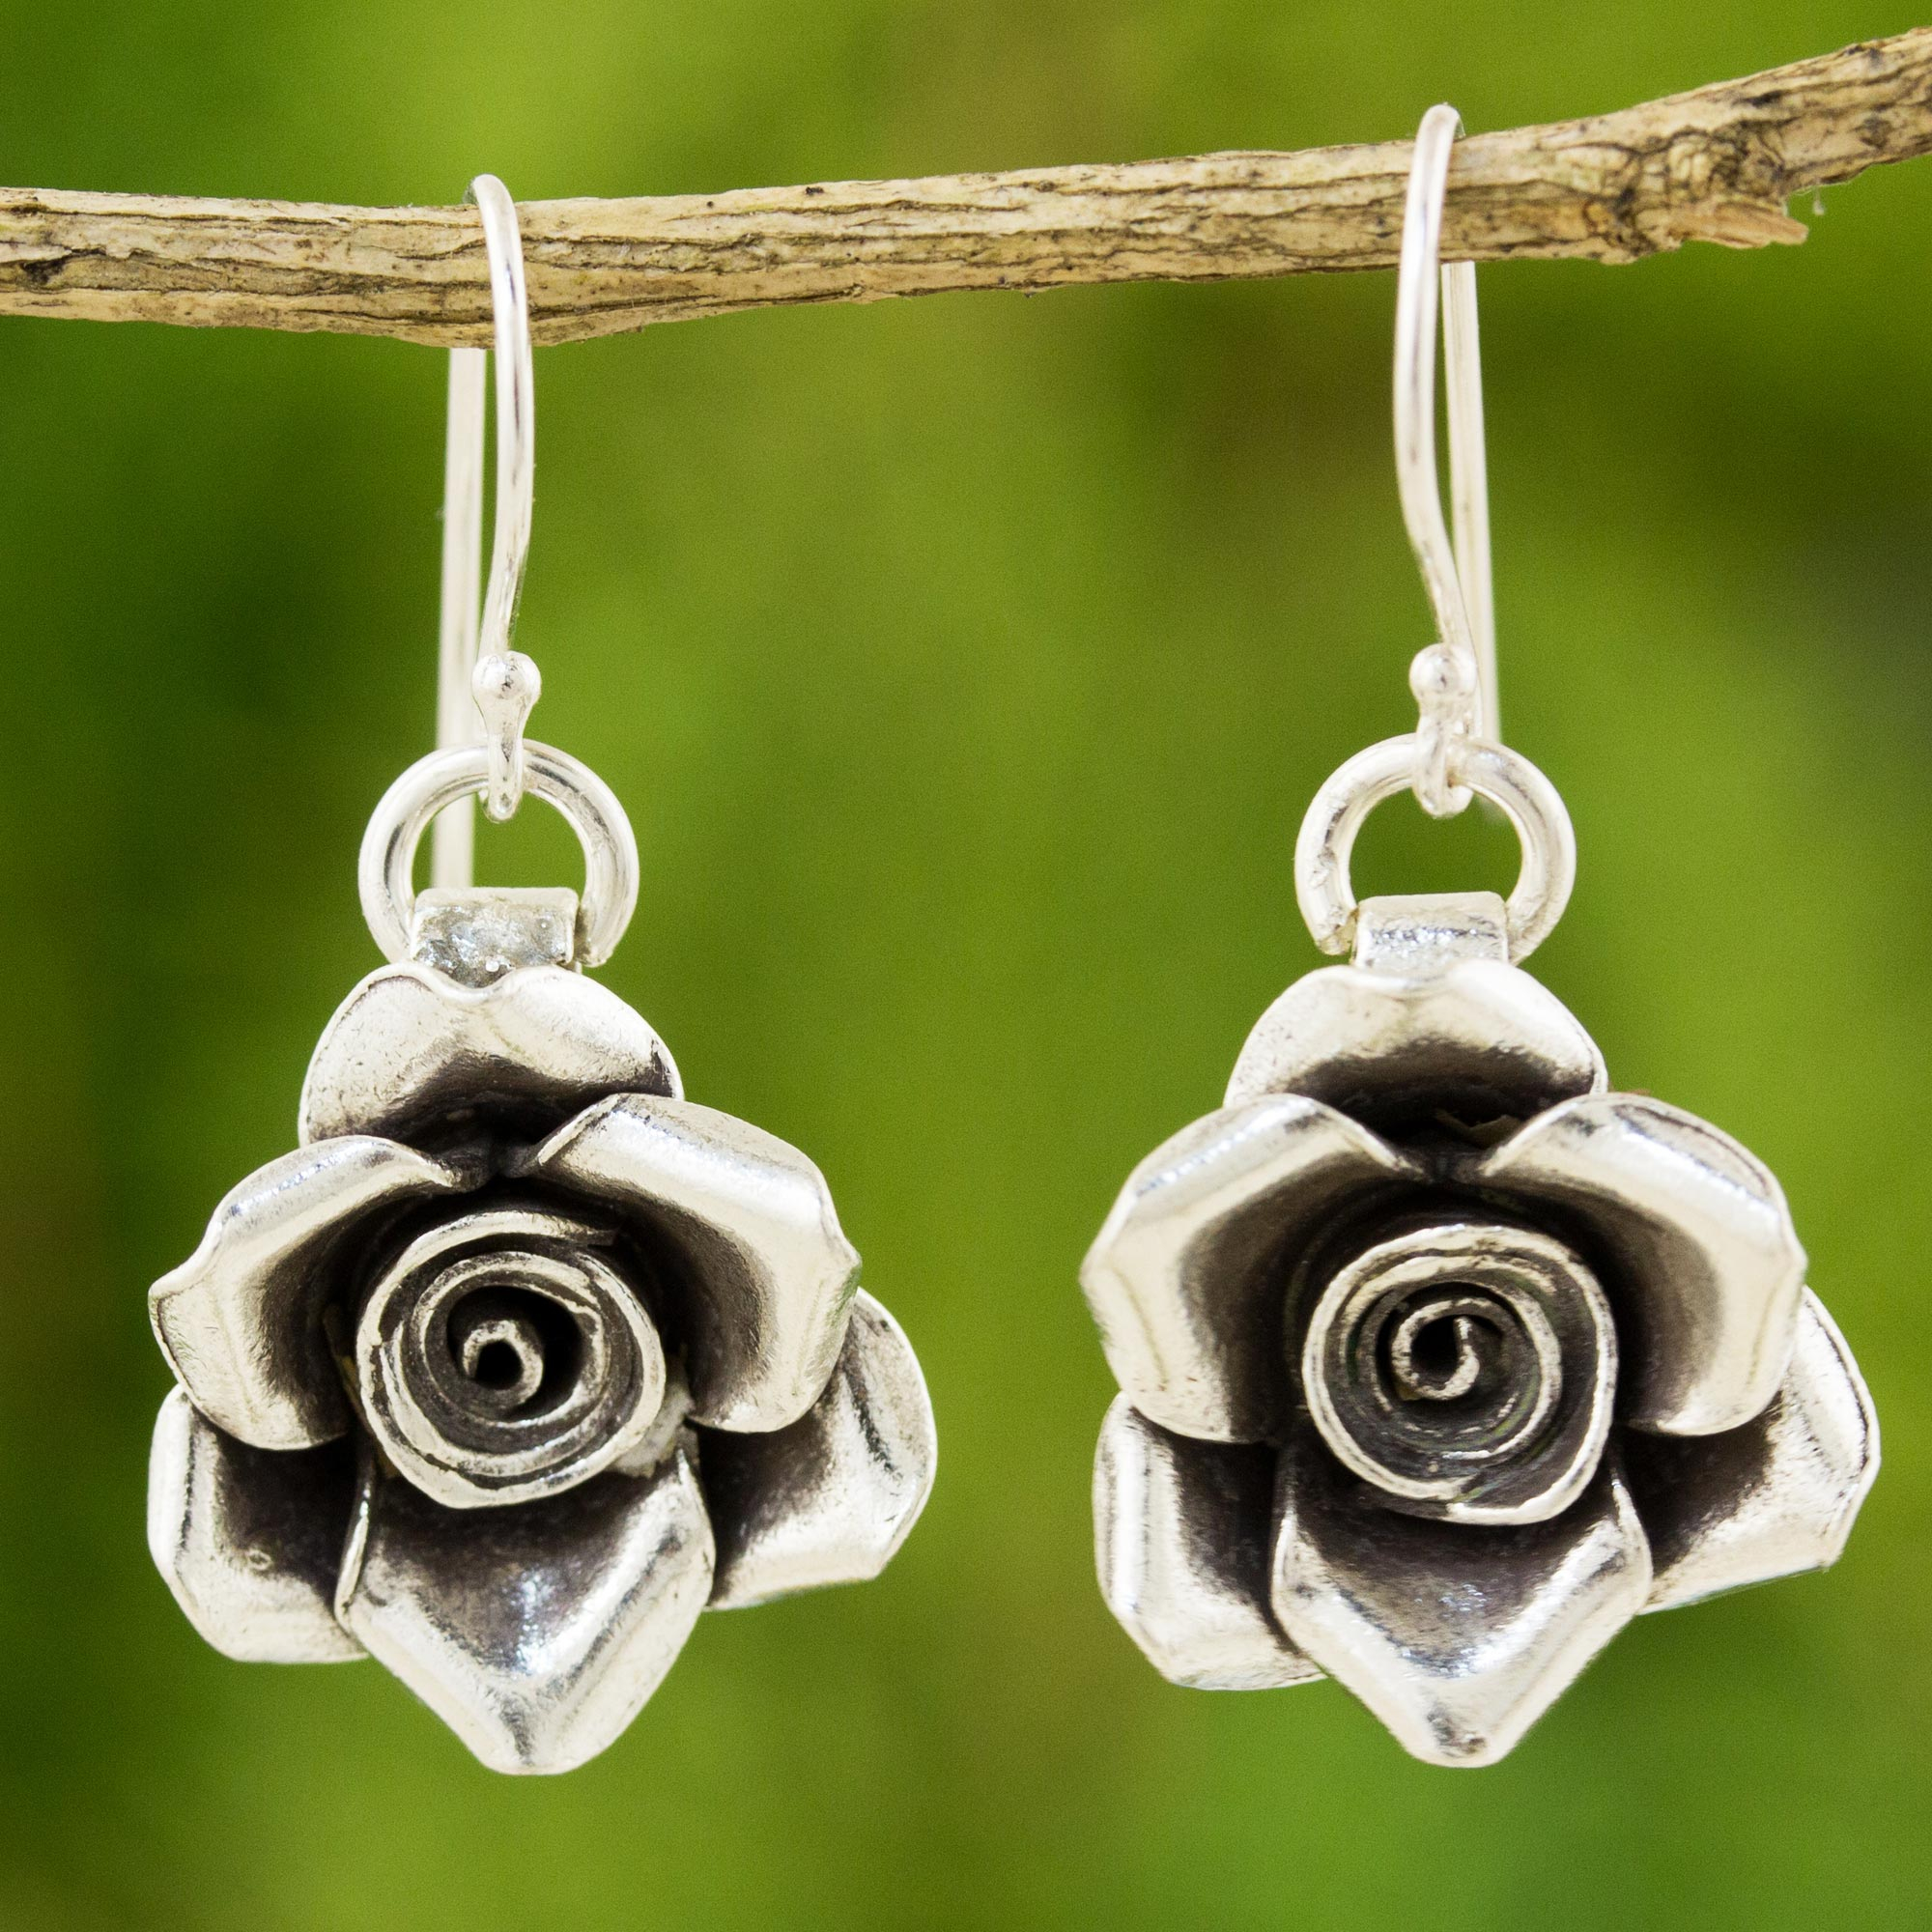 Ship within 24hrs vangobeauty Real 925 Sterling Silver 3D Rose Drop Earrings